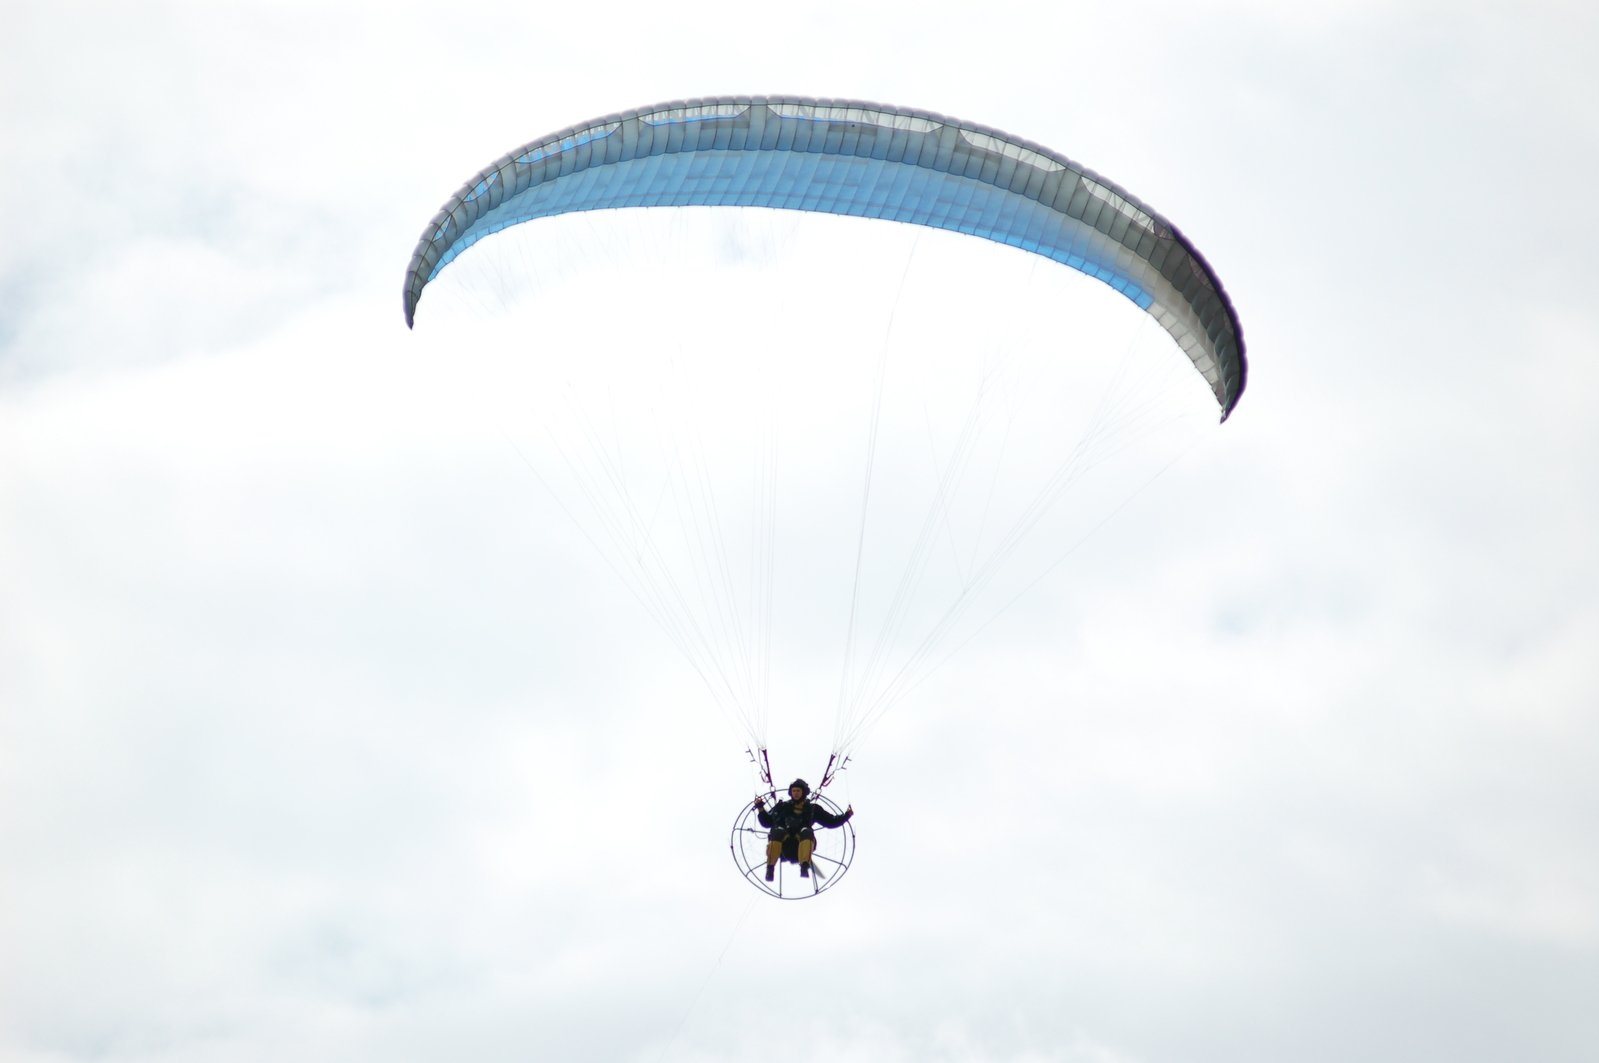 a man is parachute surfing in the air